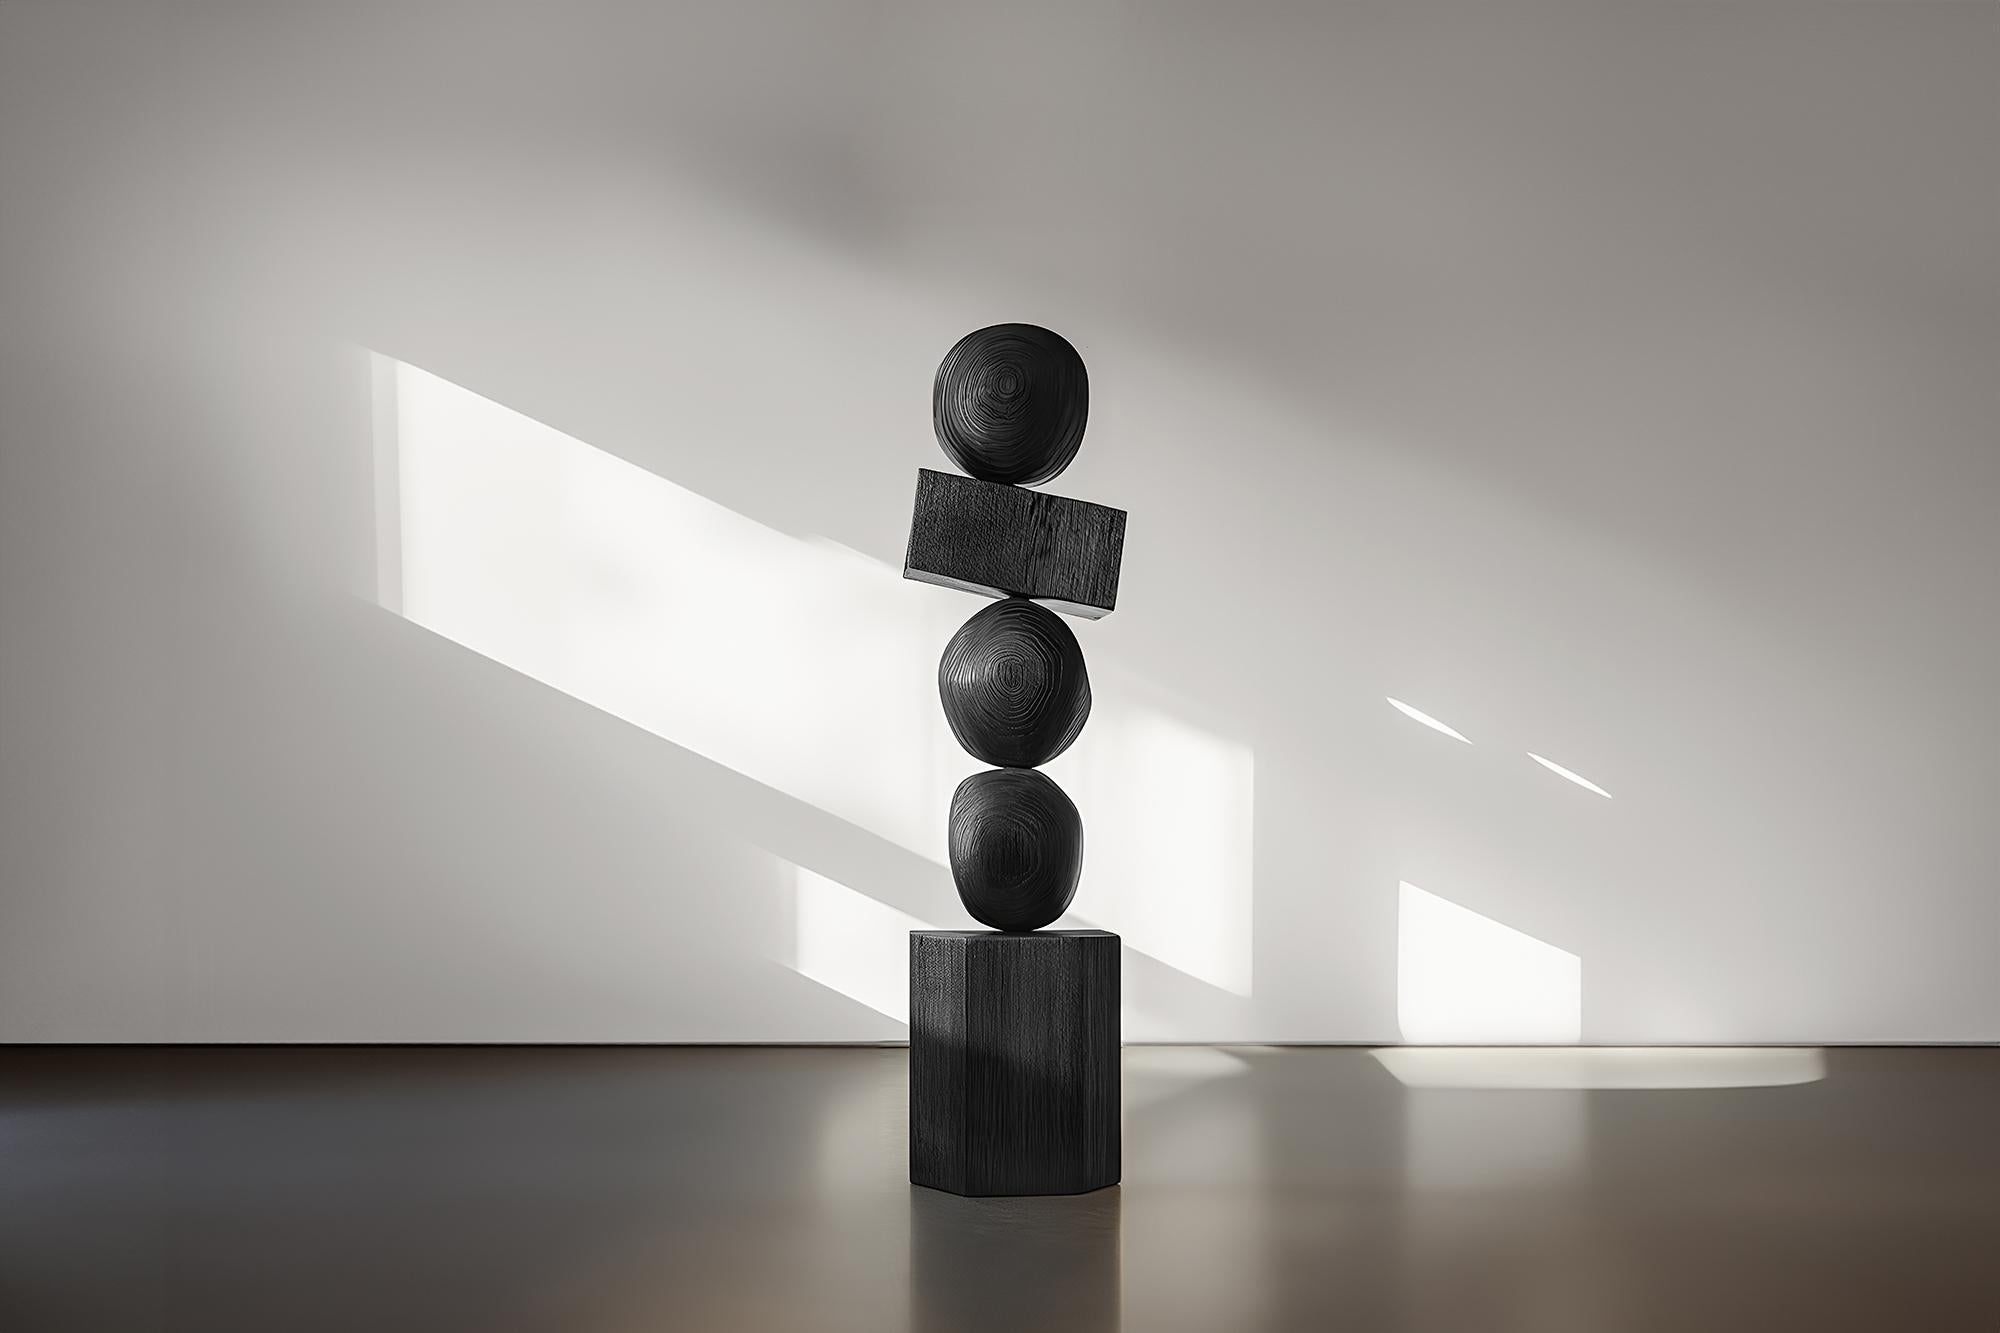 Joel Escalona's Sleek Dark Totem in Black Solid Wood, Still Stand No92
——

Joel Escalona's wooden standing sculptures are objects of raw beauty and serene grace. Each one is a testament to the power of the material, with smooth curves that flow into